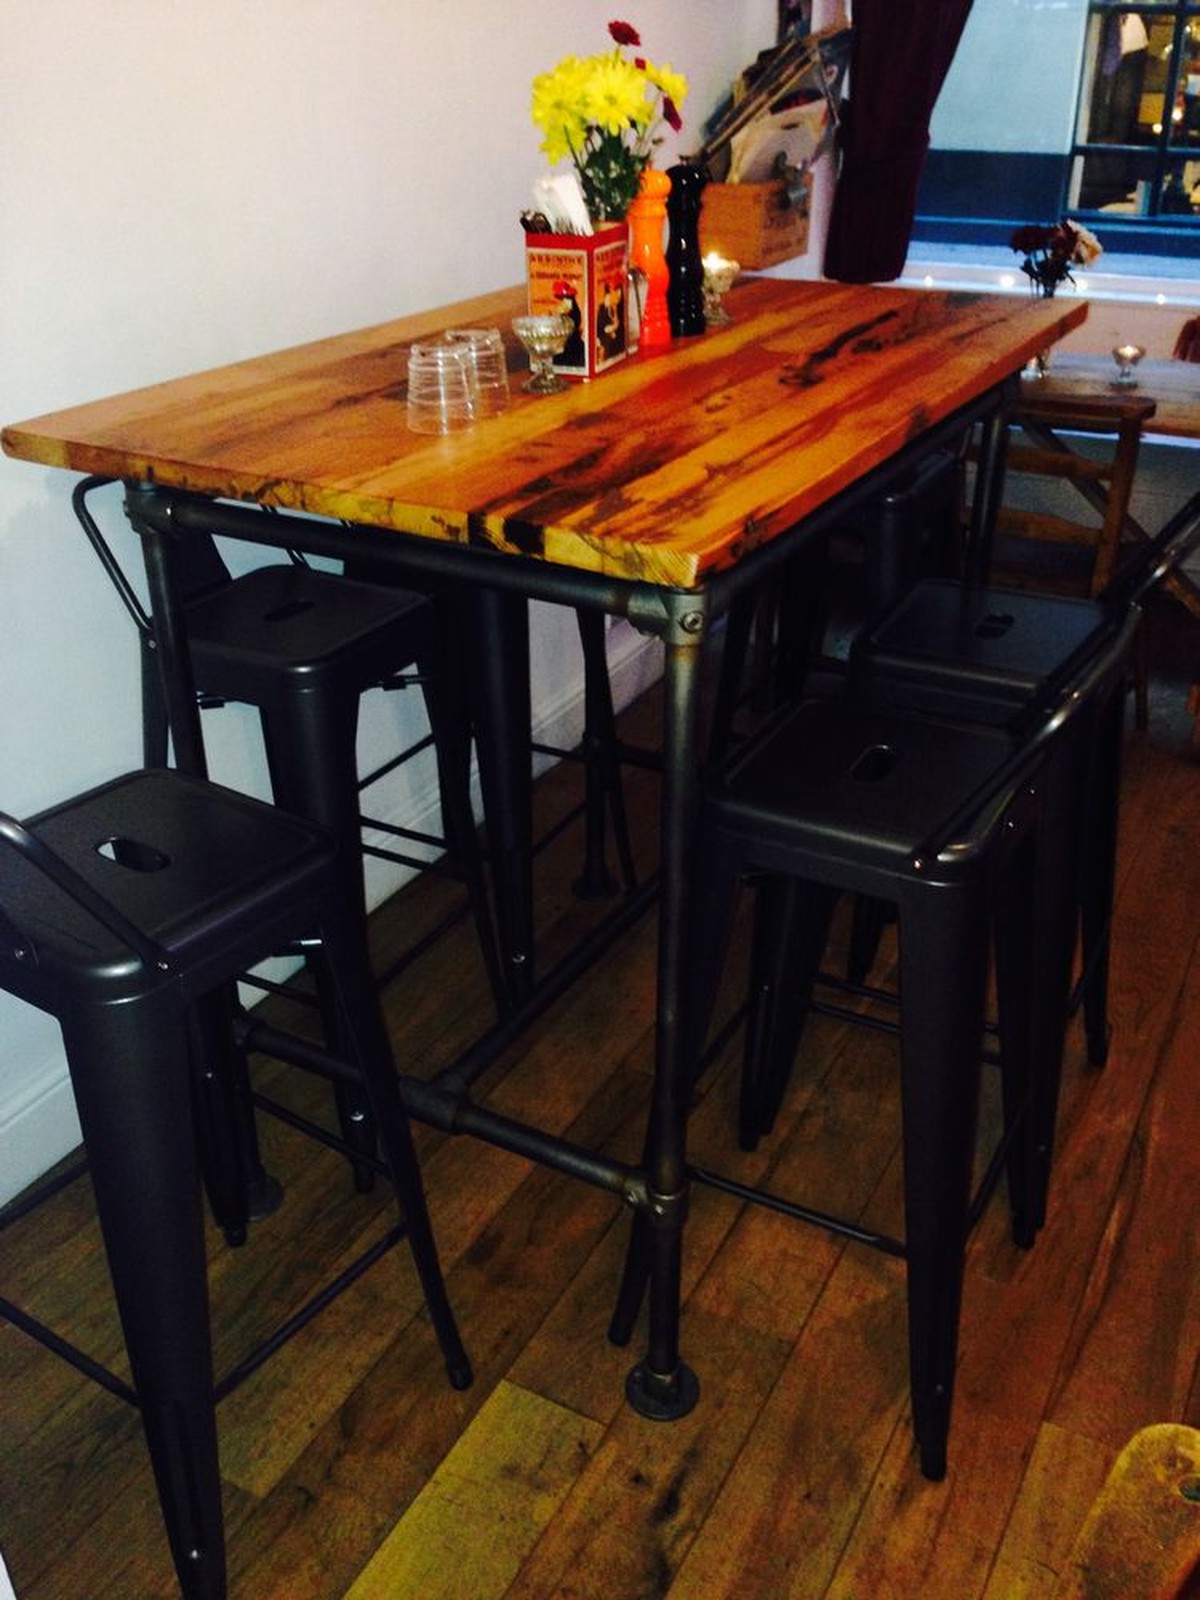 Secondhand Chairs and Tables | Restaurant Chairs ...